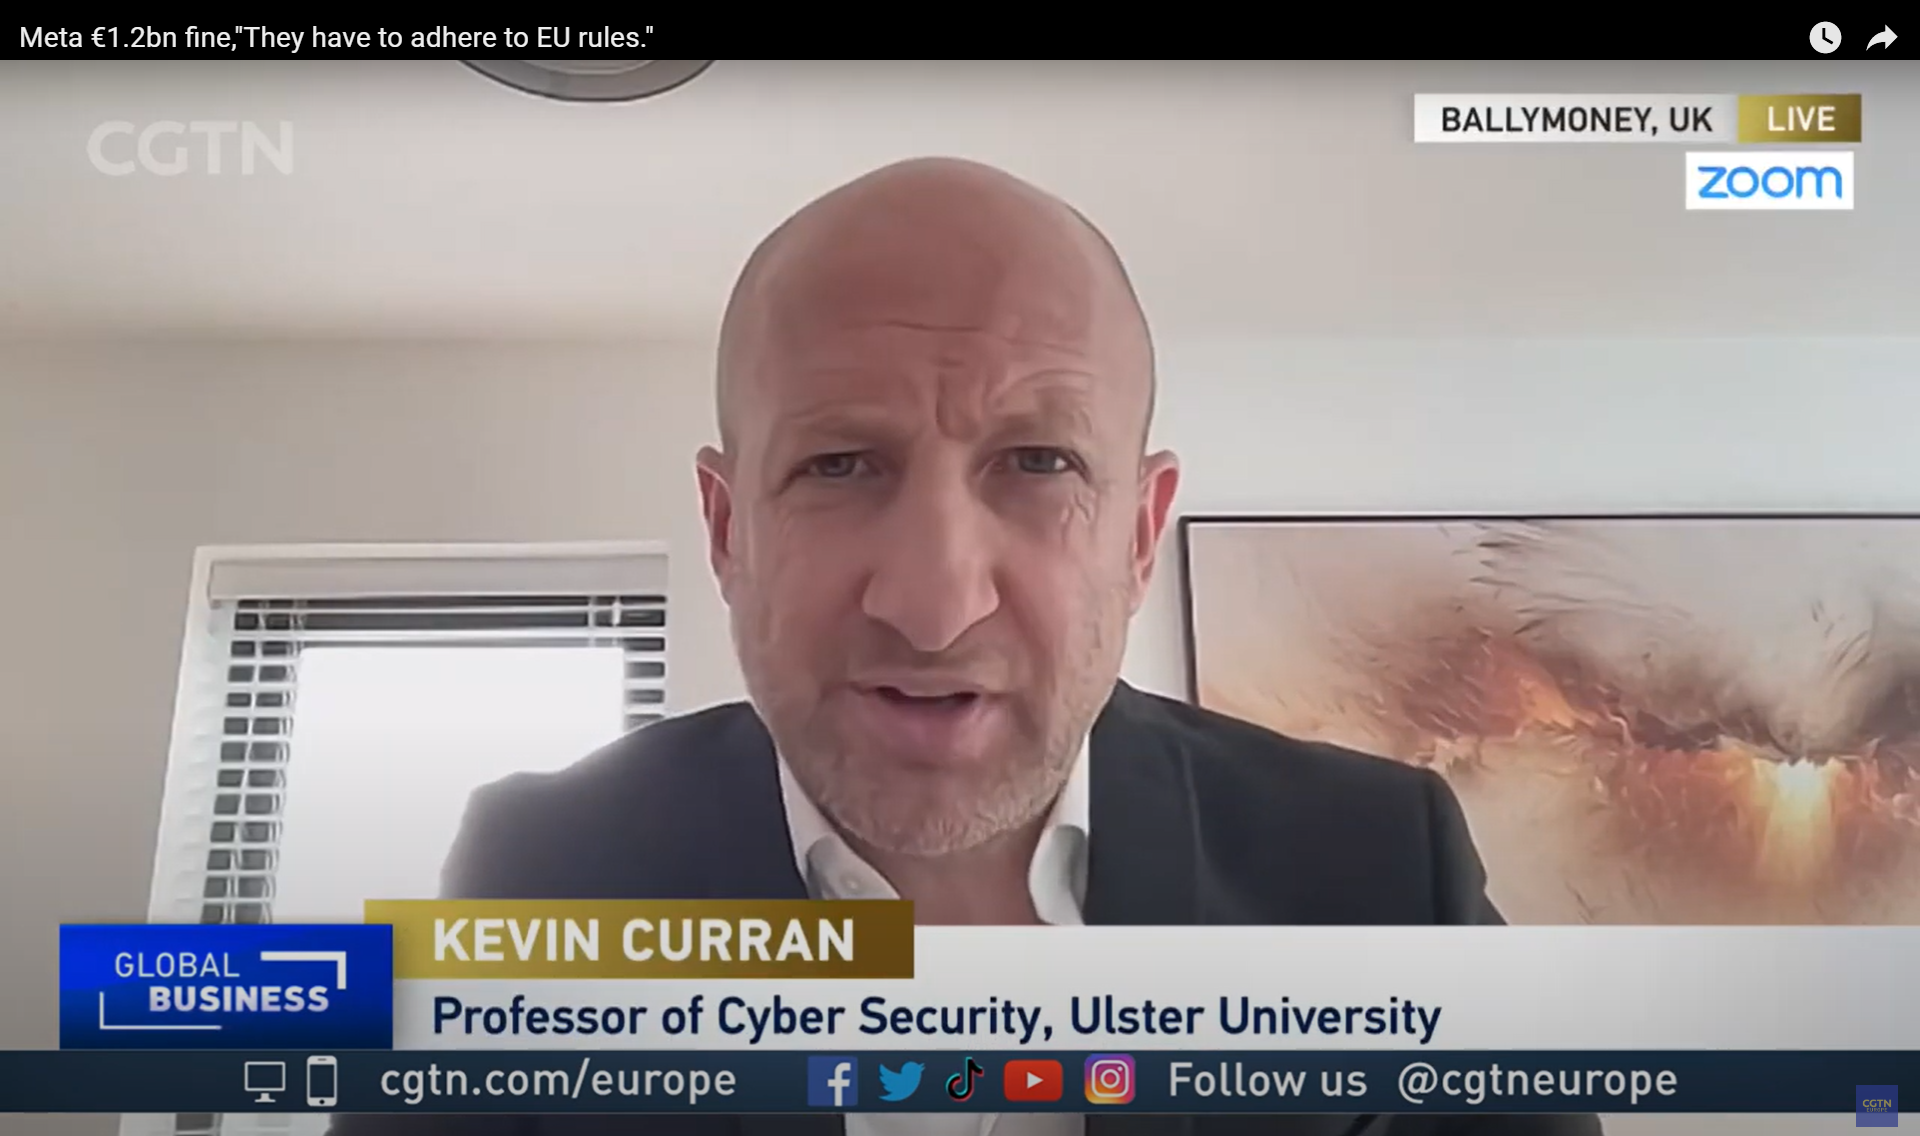 Professor Kevin Curran, Ulster University in an interview on CGTN about Meta been hit with a €1.2bn fine by the EU for privacy violations and ordered to suspend transfers of user data to the US.